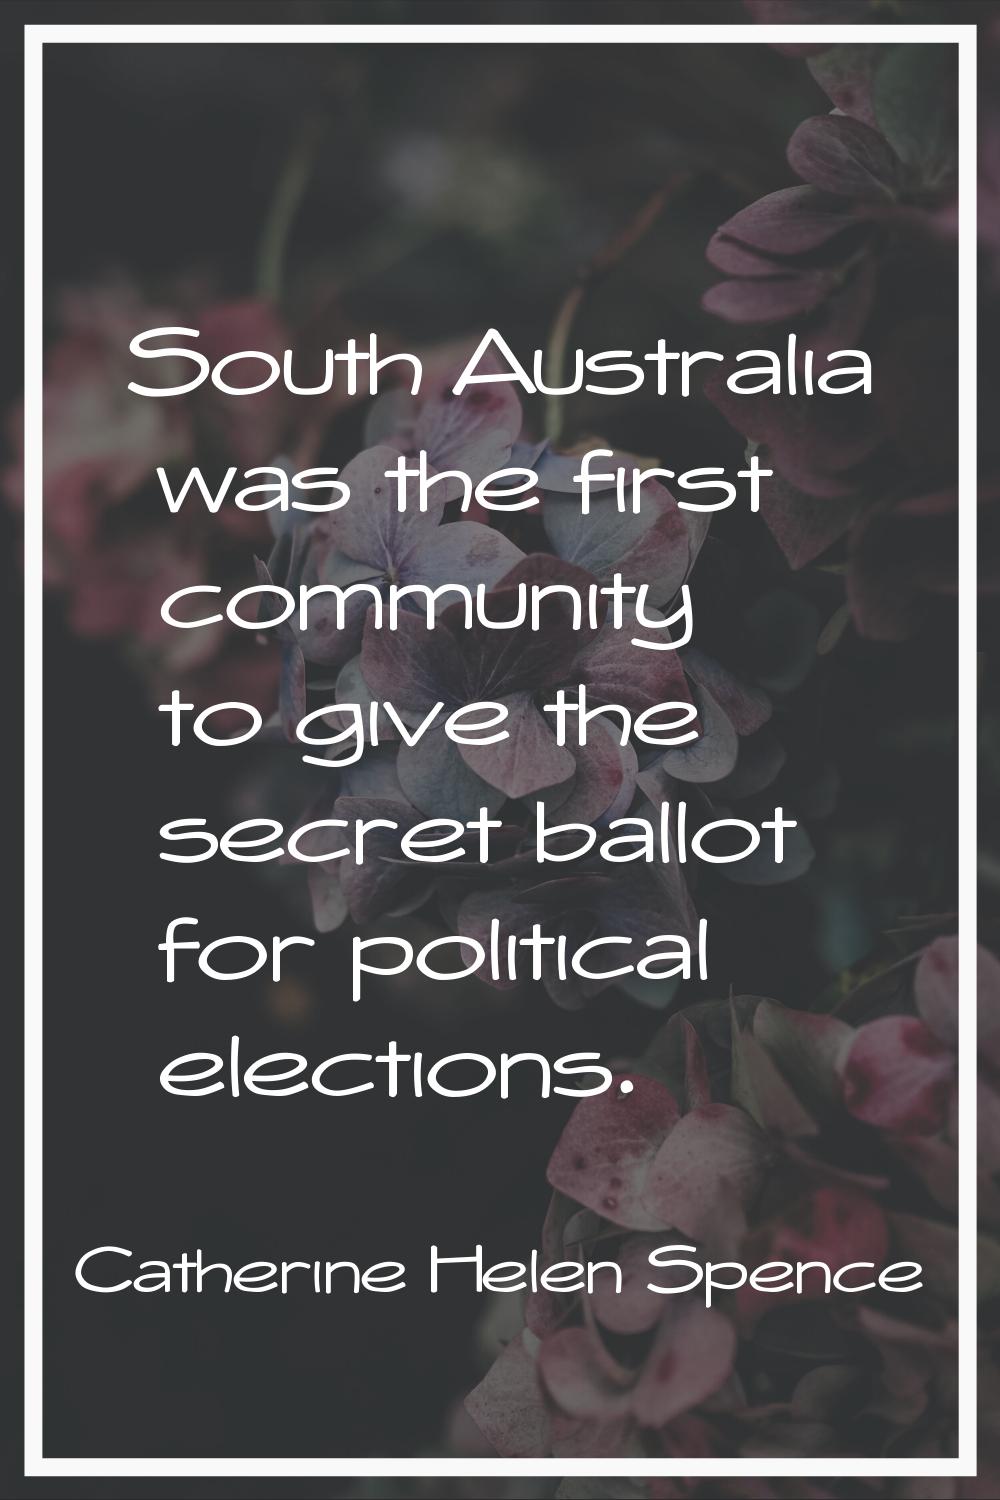 South Australia was the first community to give the secret ballot for political elections.